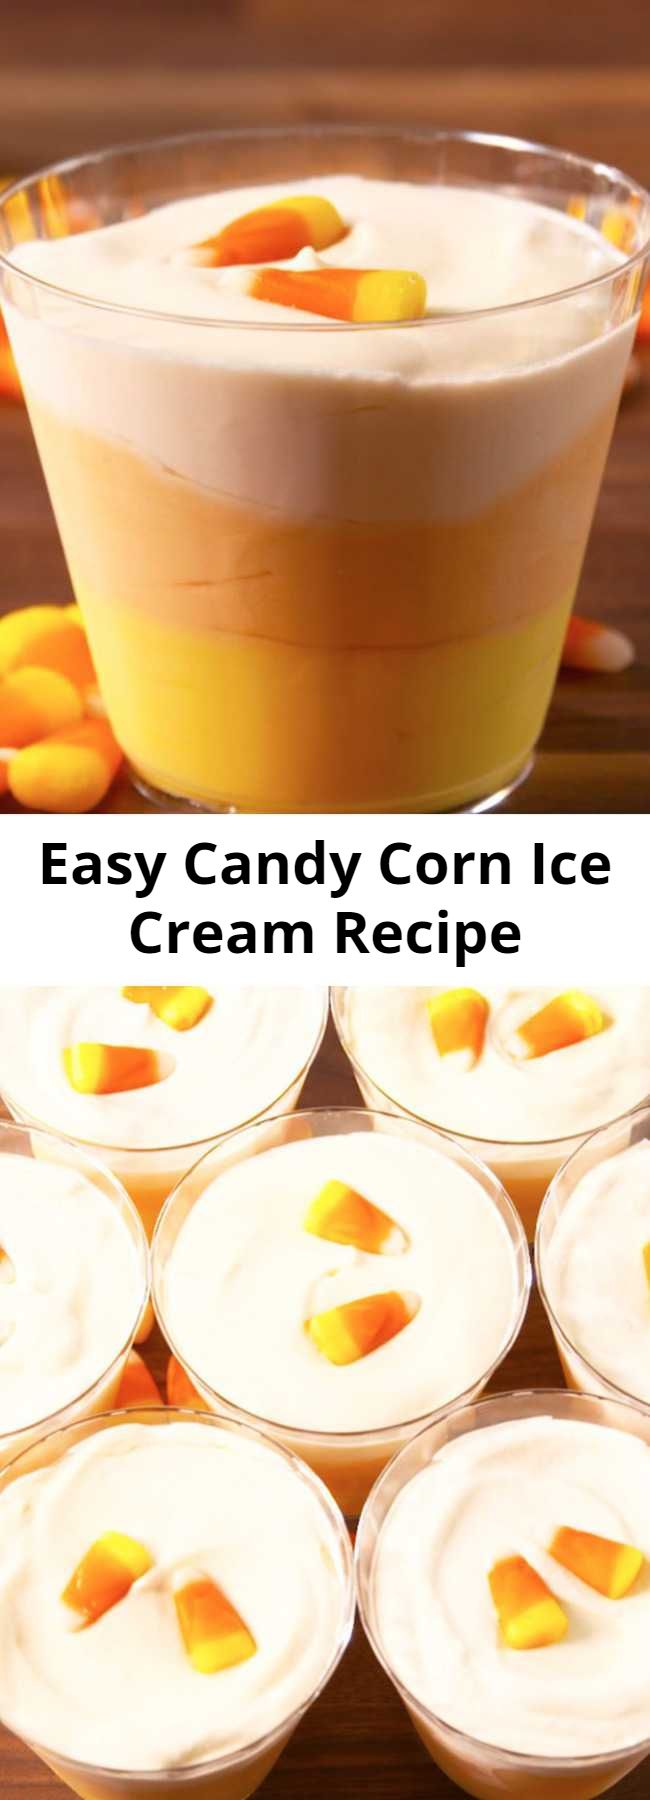 Easy Candy Corn Ice Cream Recipe - This is going to change whatever you feel about candy corn. Trust.